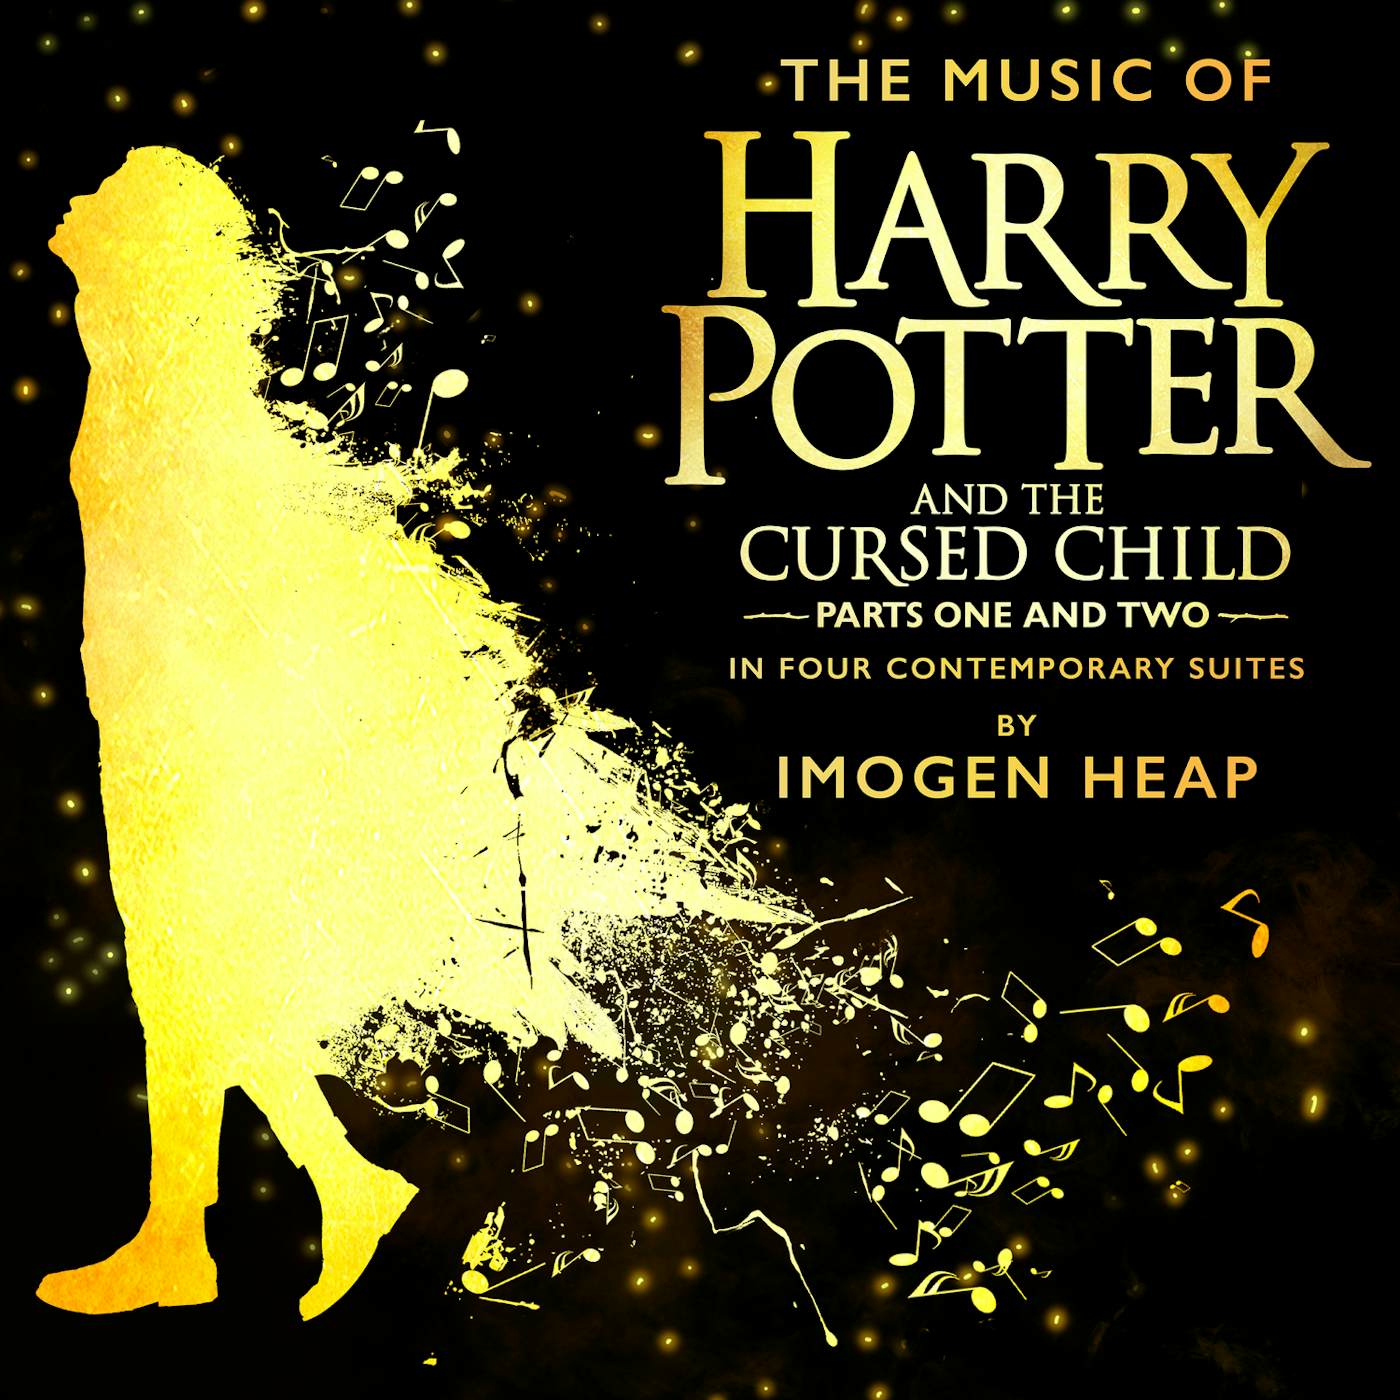 Imogen Heap MUSIC OF HARRY POTTER AND THE CURSED CHILD - IN CD